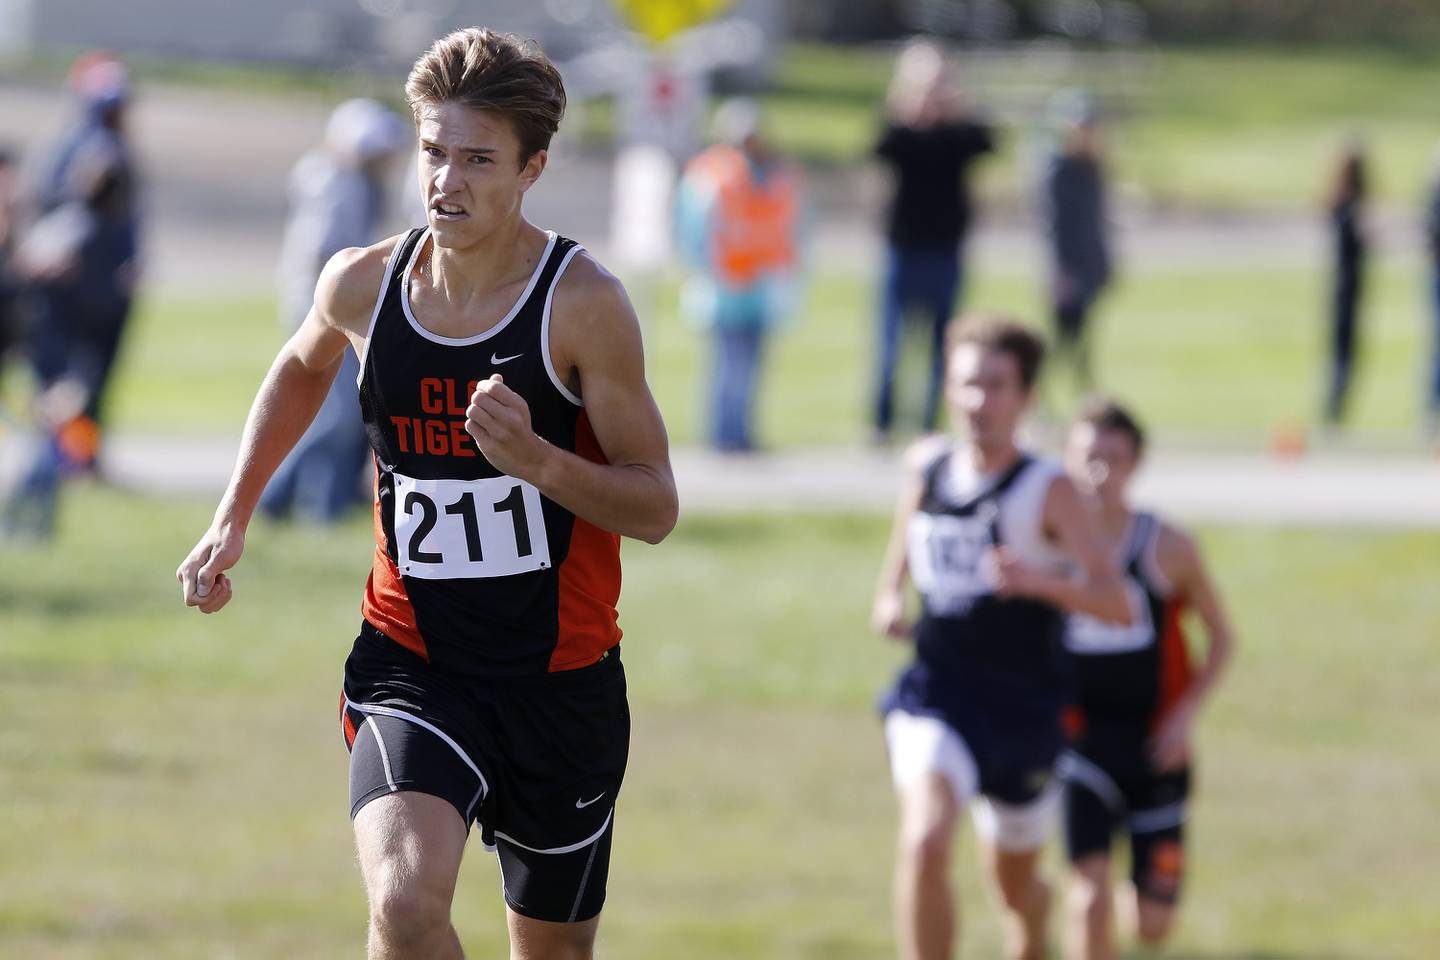 Crystal Lake Central's Karson Hollander heads for the finish line to place tenth during the boys Class 2A Woodstock North XC Sectional at Emricson Park on Saturday, Oct. 30, 2021 in Woodstock.